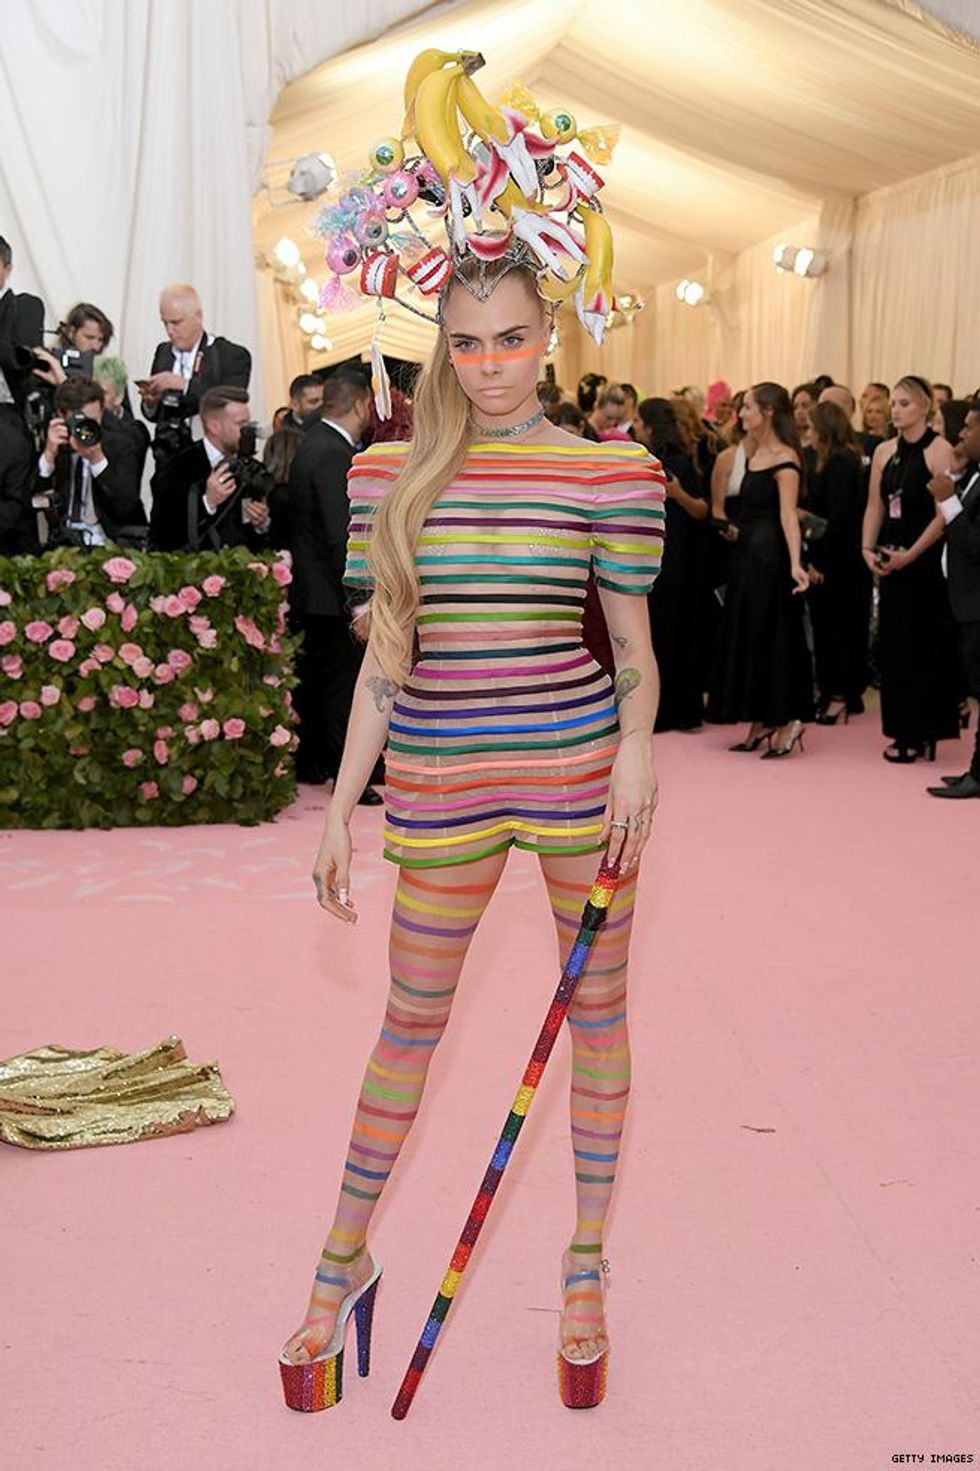 The Best Dressed Celebrities at the 2019 'Camp' Met Gala